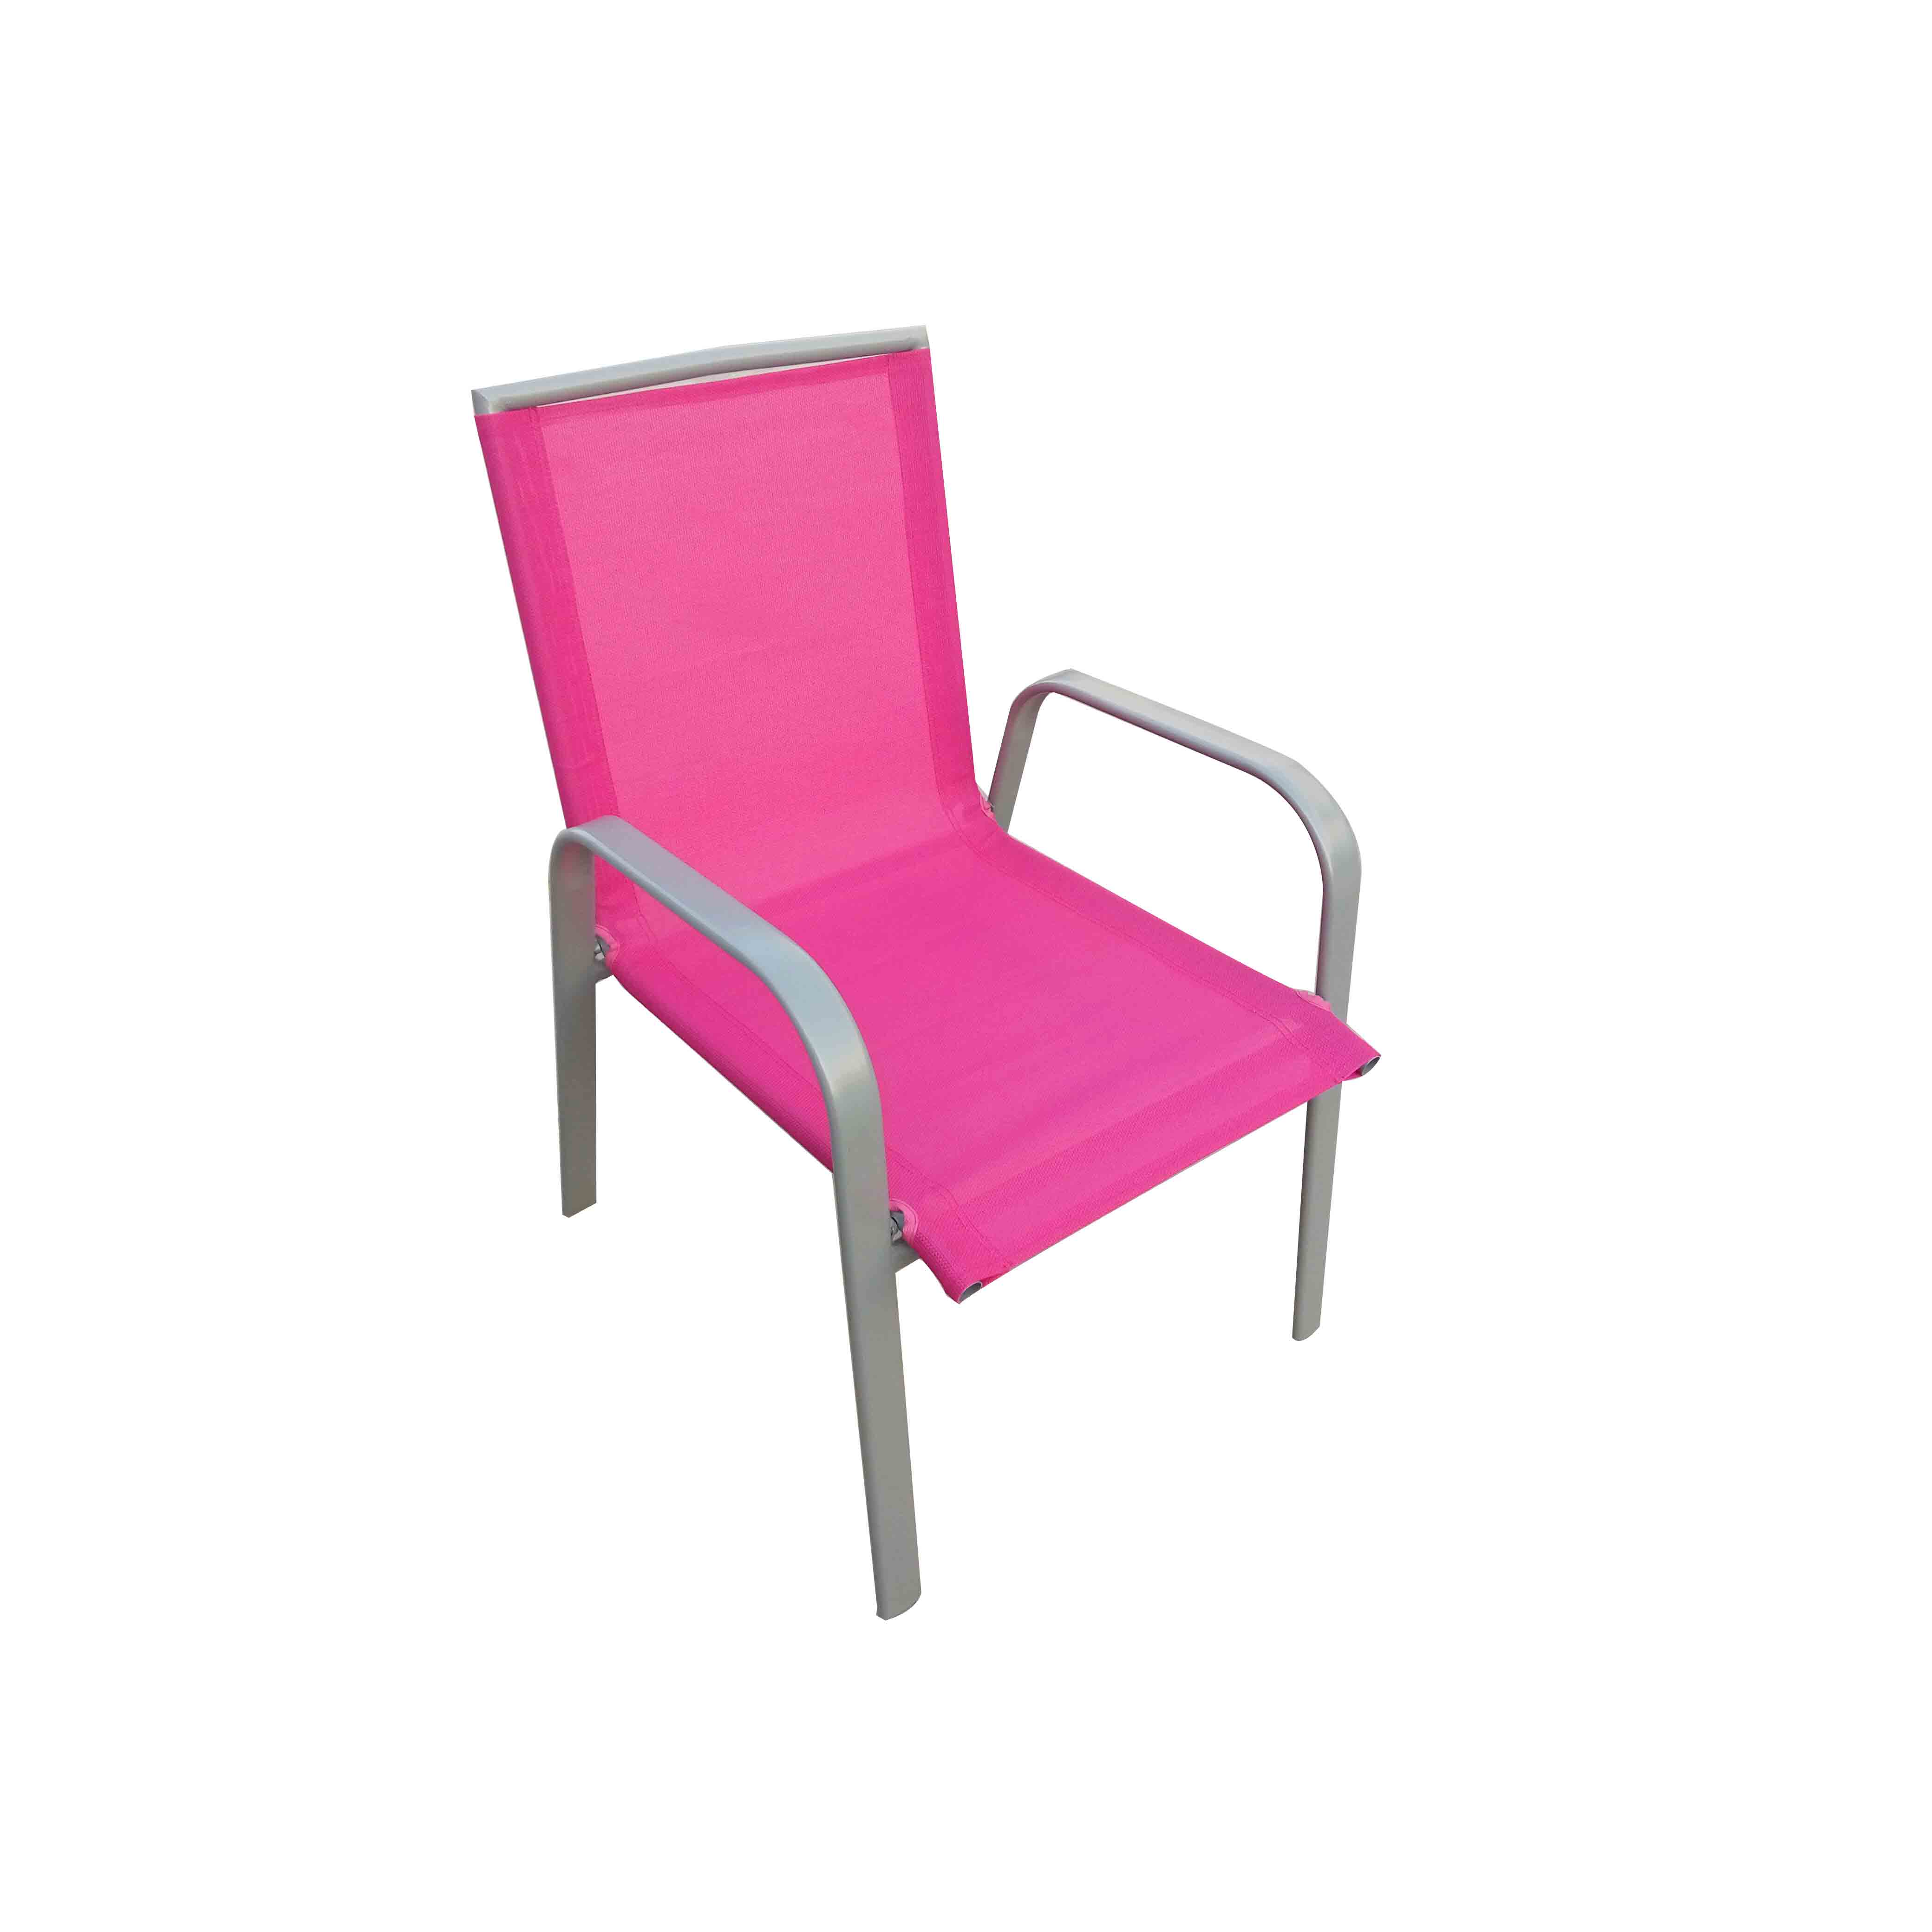 JJ302C-Fuscia Kid’s steel textilene stacking chair Featured Image